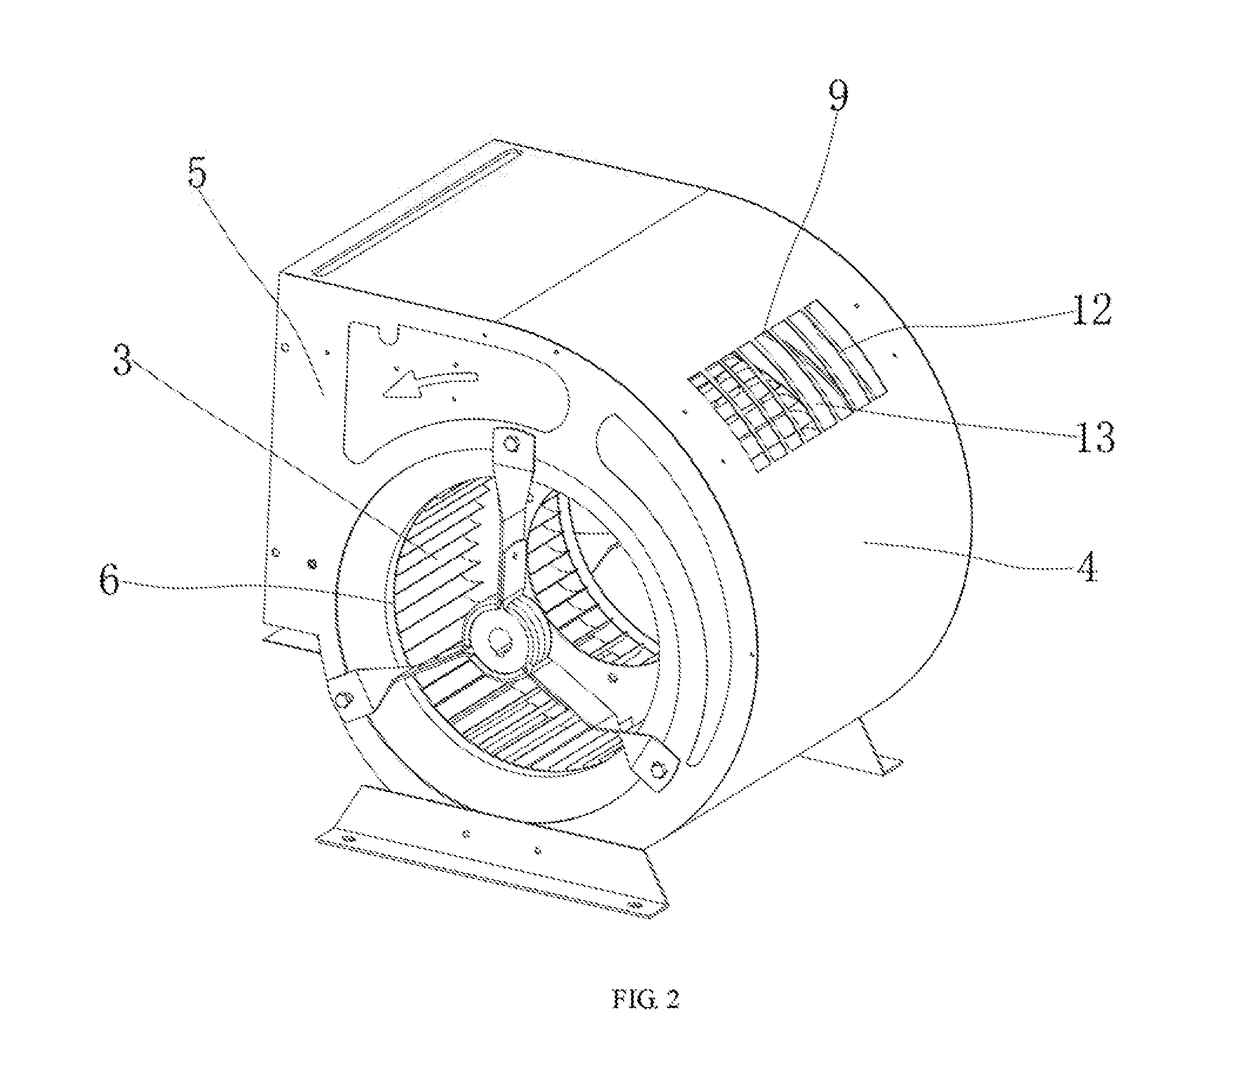 Novel volute centrifugal fan with permanent-magnet brush-less motor system